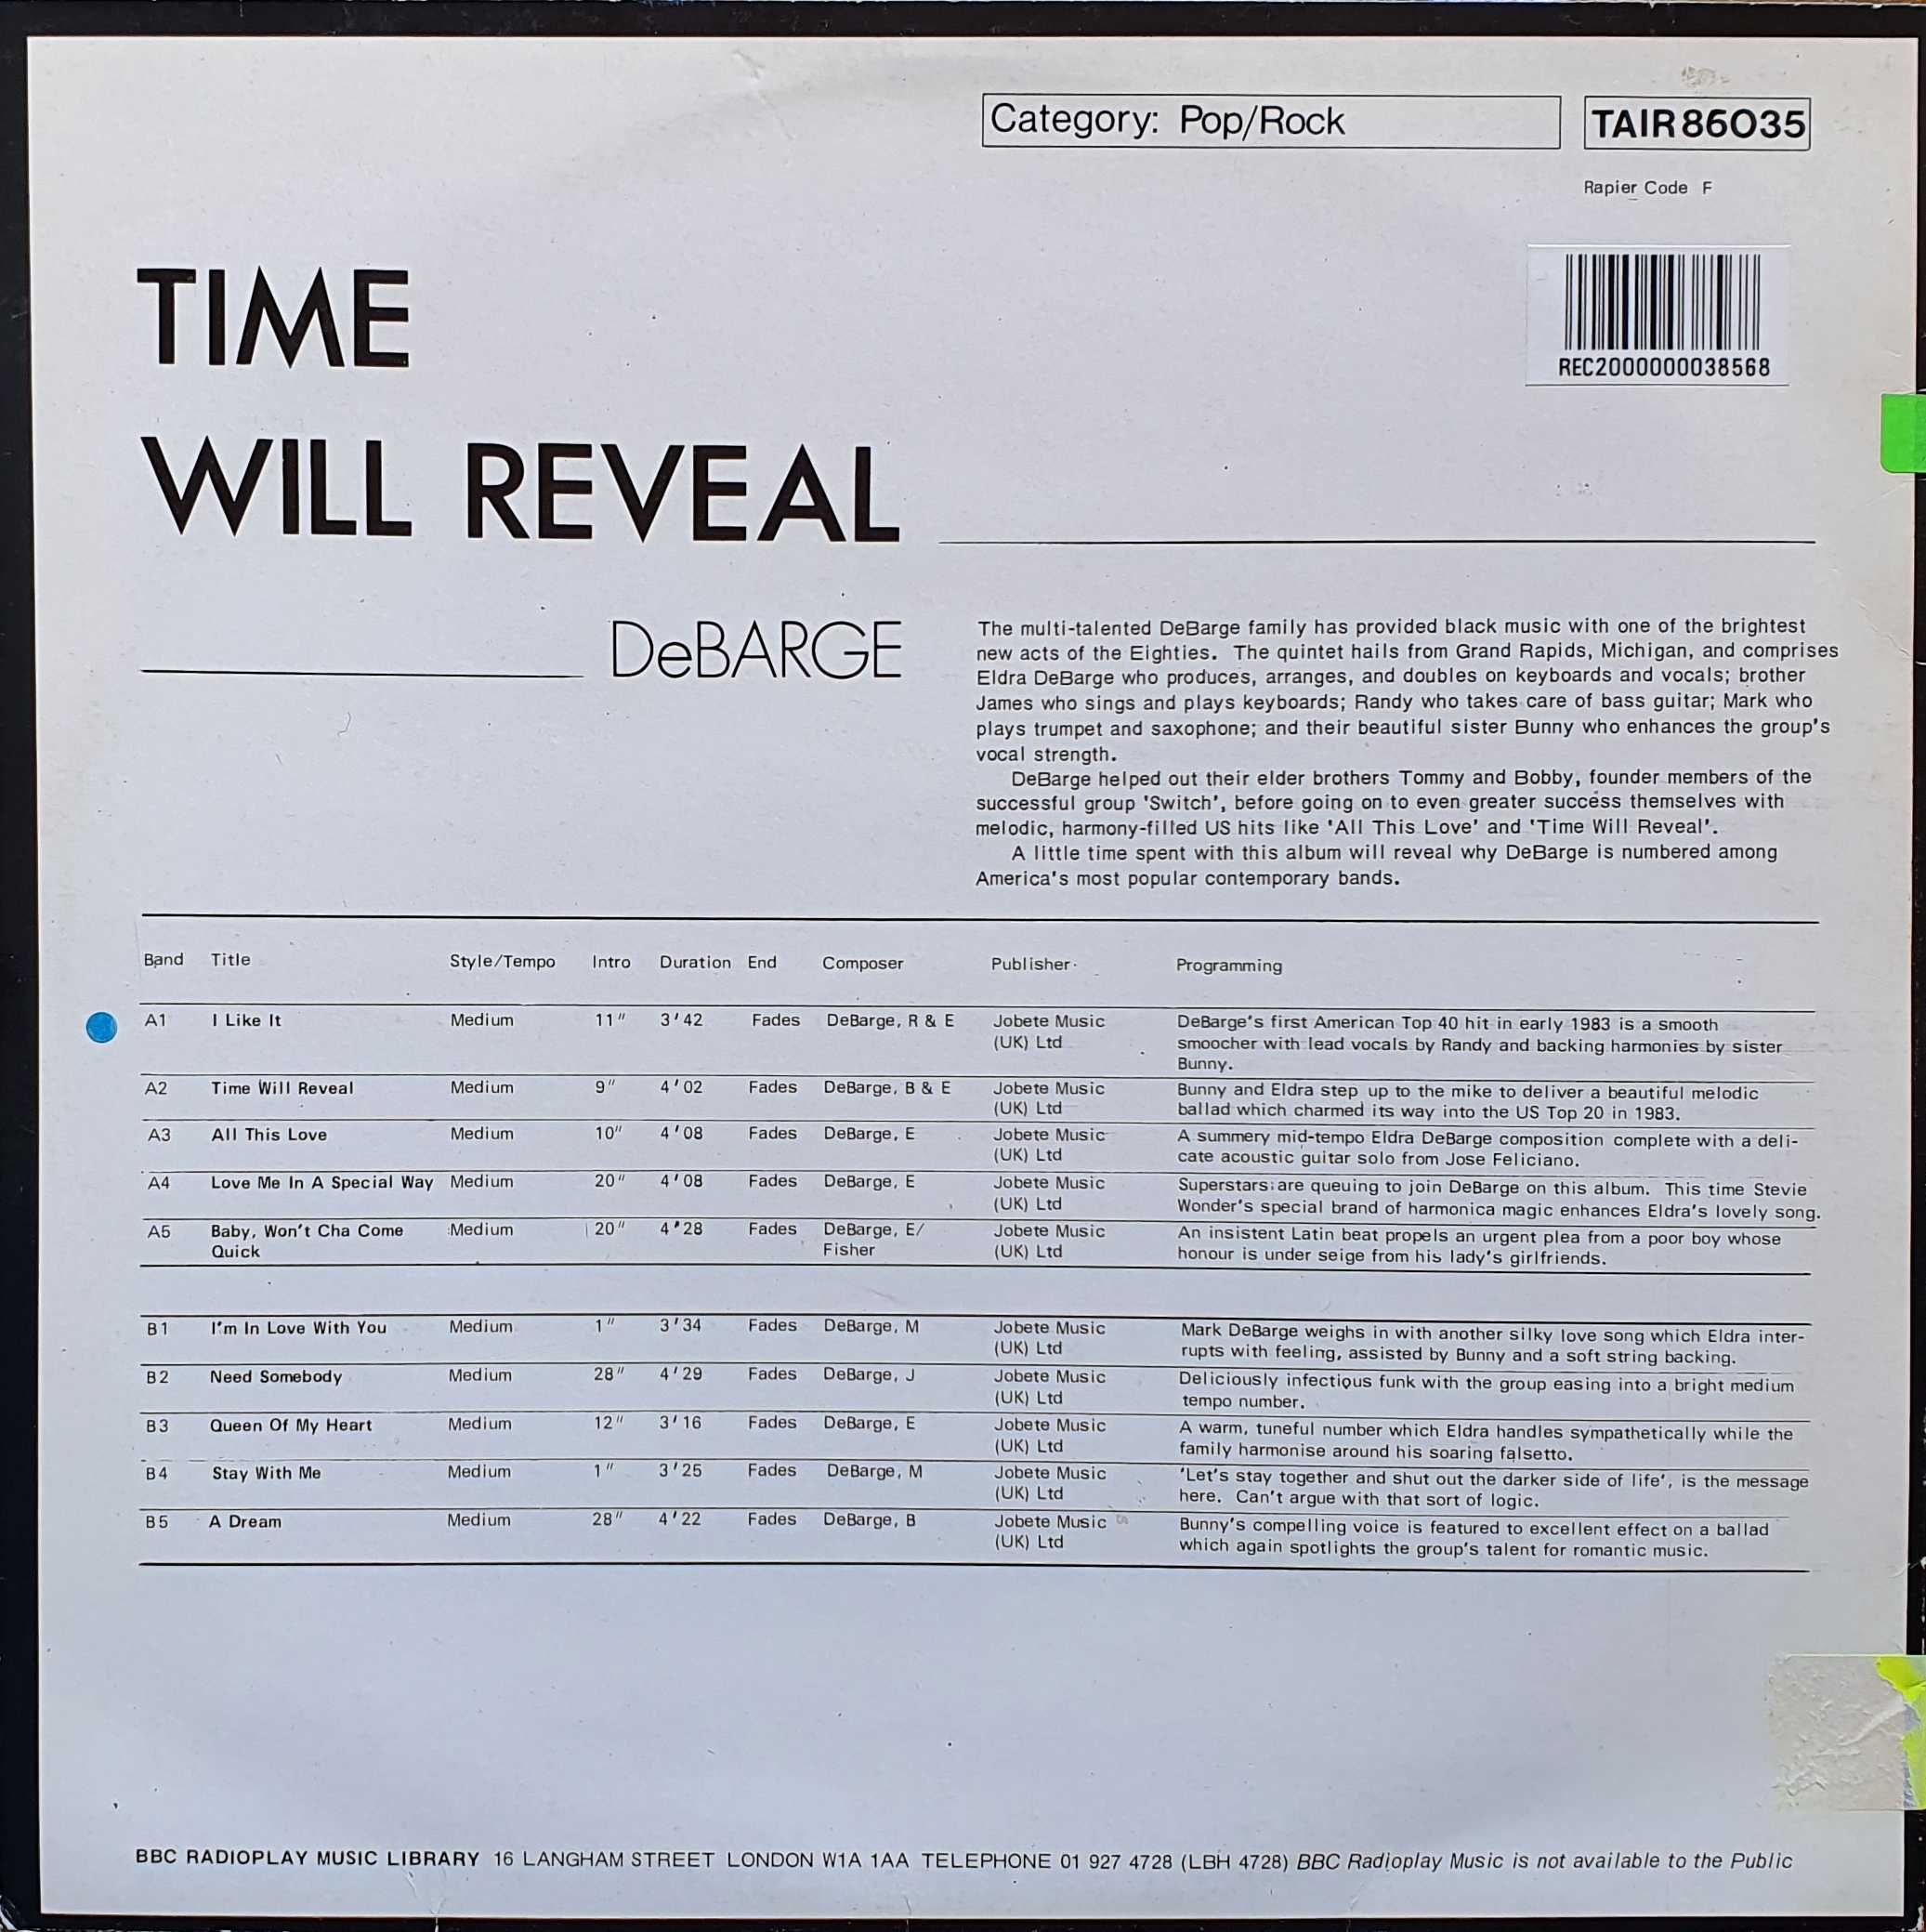 Picture of TAIR 86035 Time will reveal by artist DeBarge from the BBC records and Tapes library